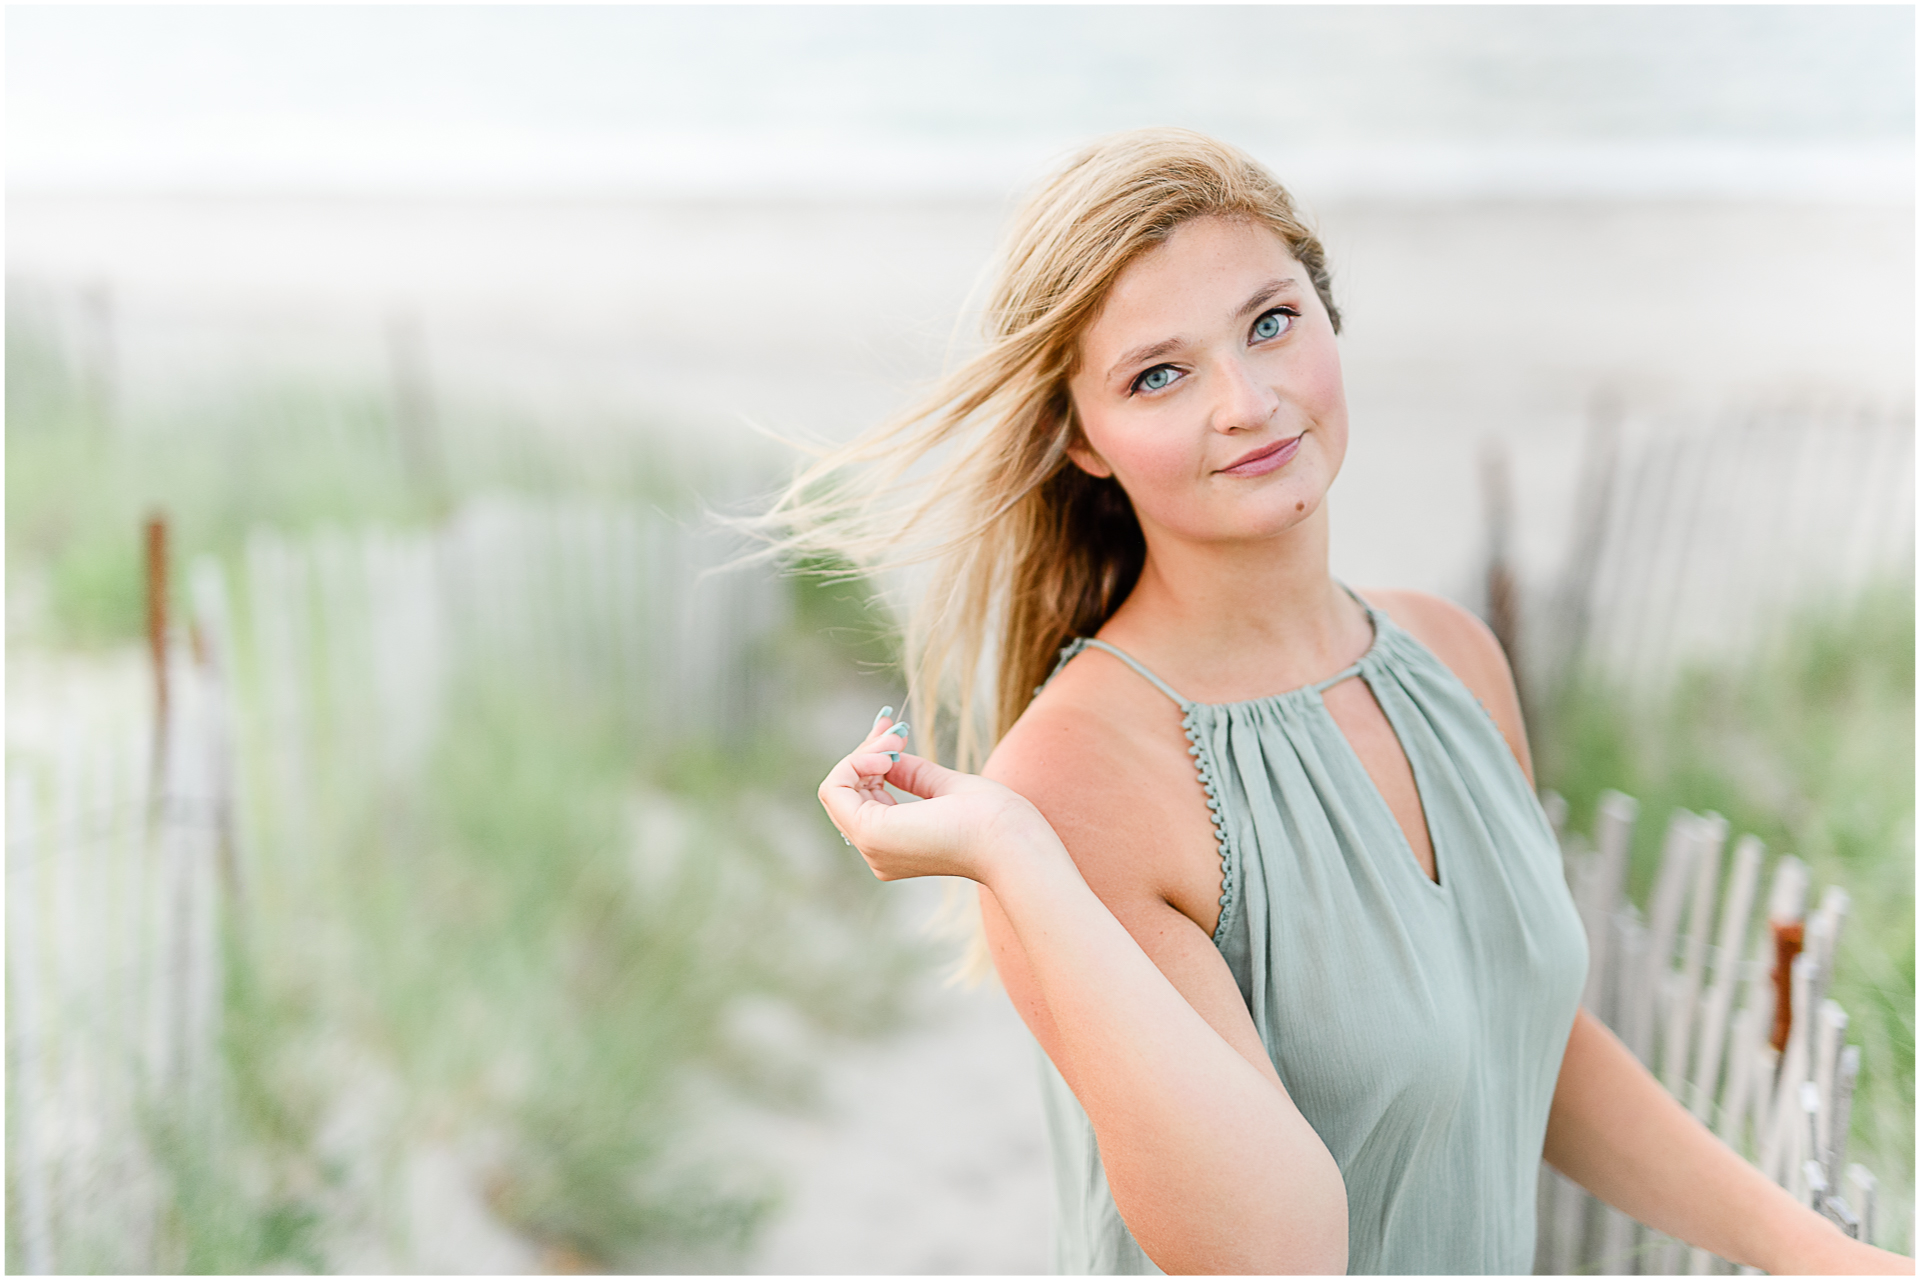 Photo by Marshfield senior portrait photographer Christina Runnals | High school girl standing in front of a fence at the beach